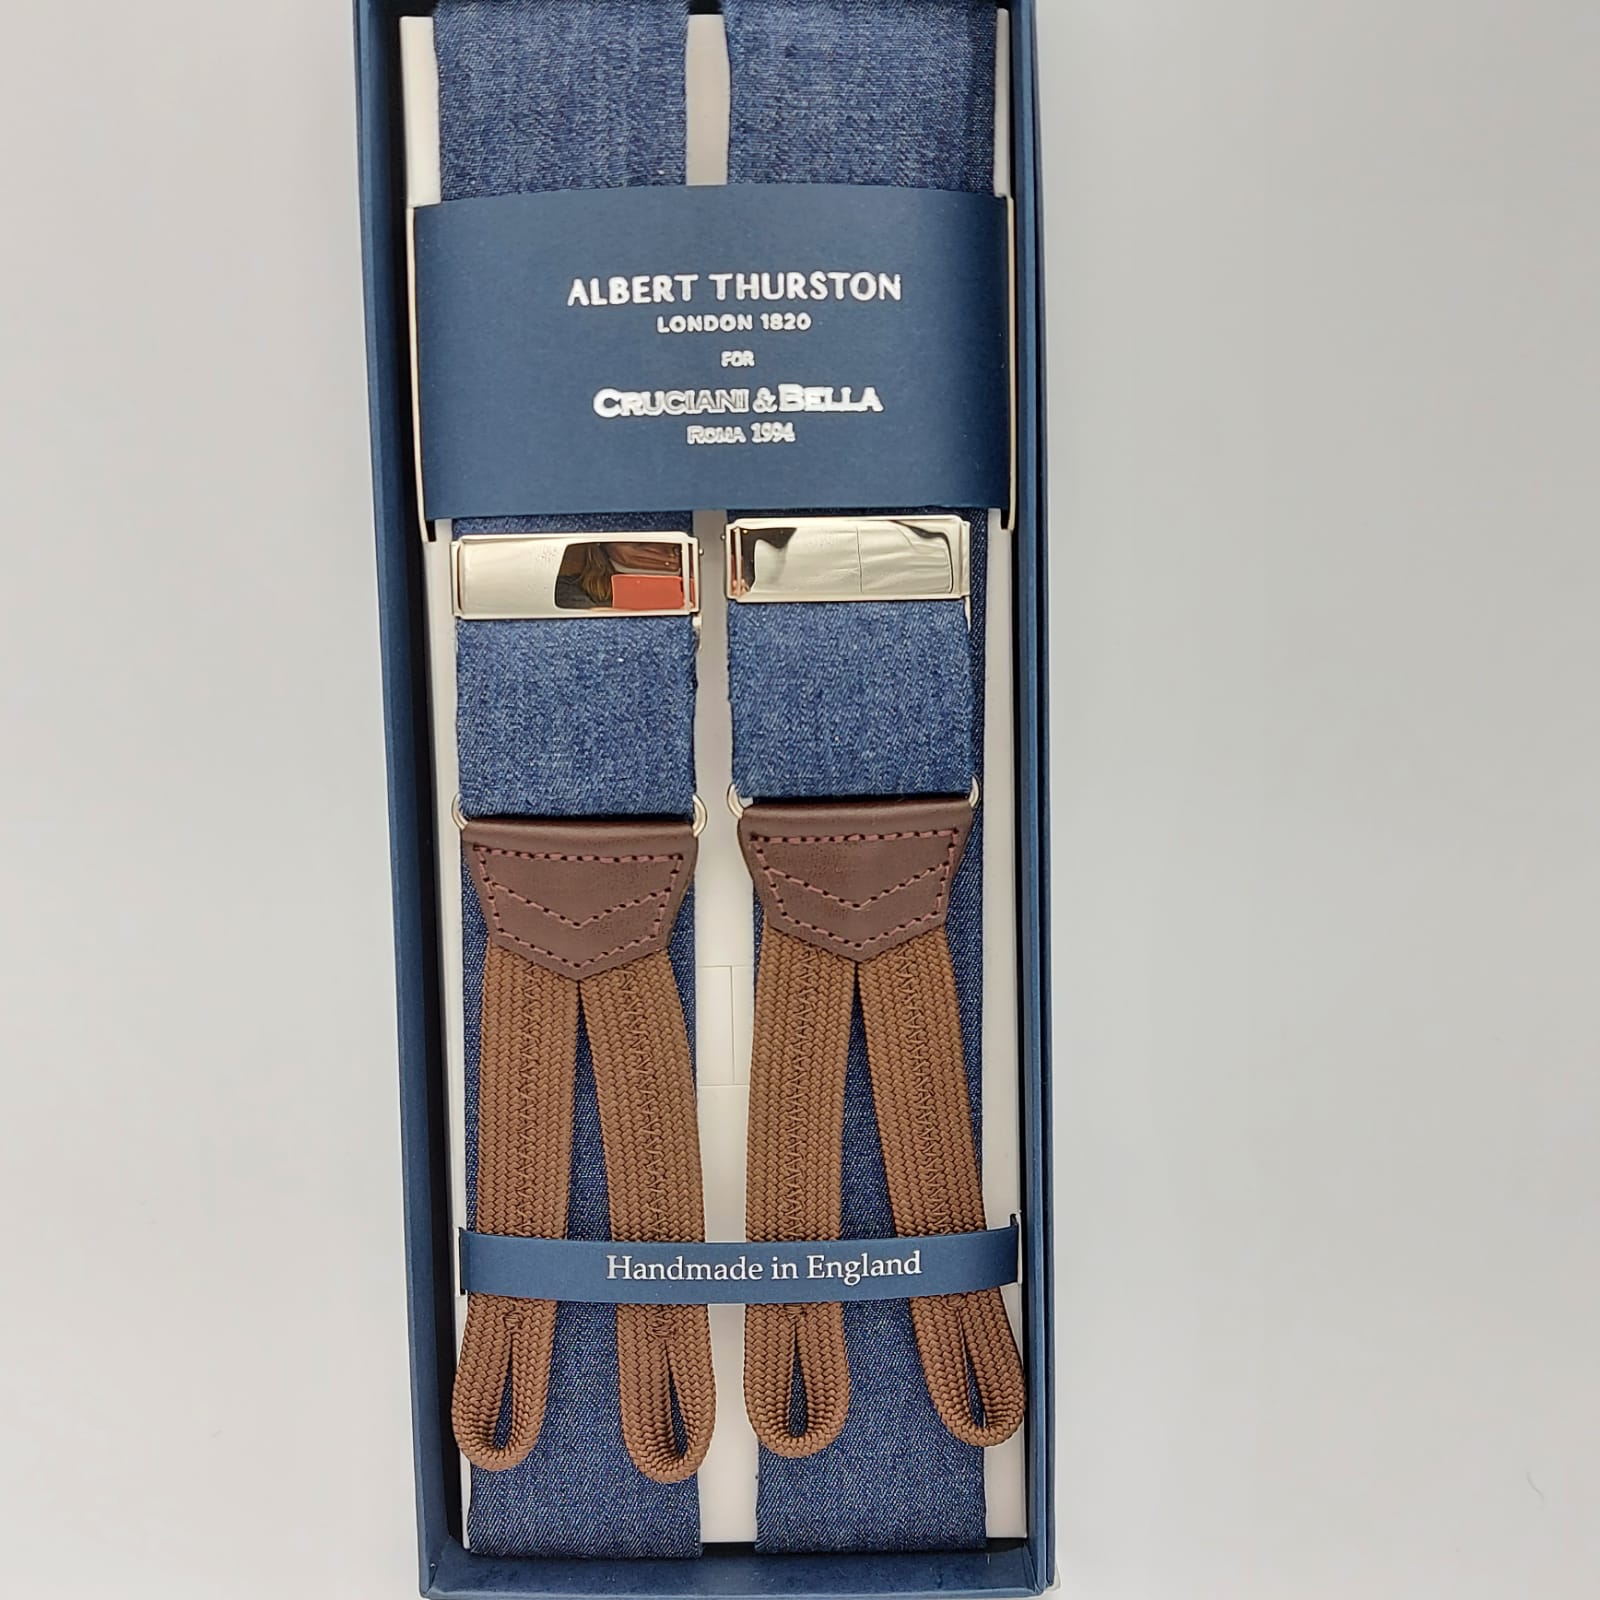 Albert Thurston for Cruciani & Bella Made in England Adjustable Sizing 40 mm braces 100% Cotton Chambray Blue Plain Color Braid ends Y-Shaped Nickel Fittings XL 6252